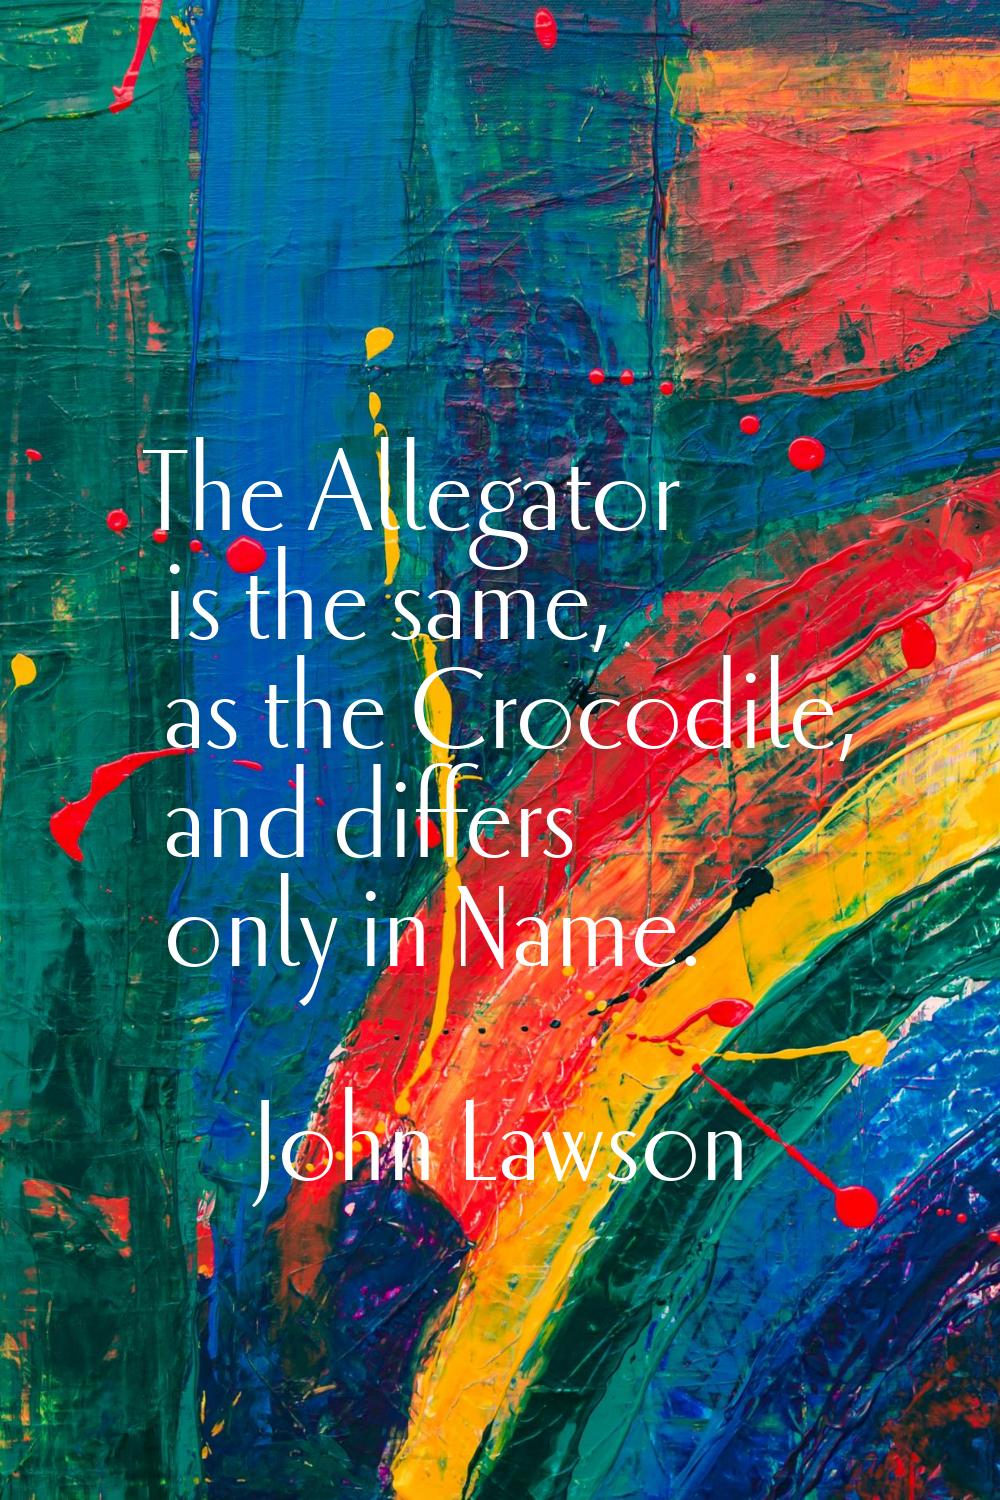 The Allegator is the same, as the Crocodile, and differs only in Name.